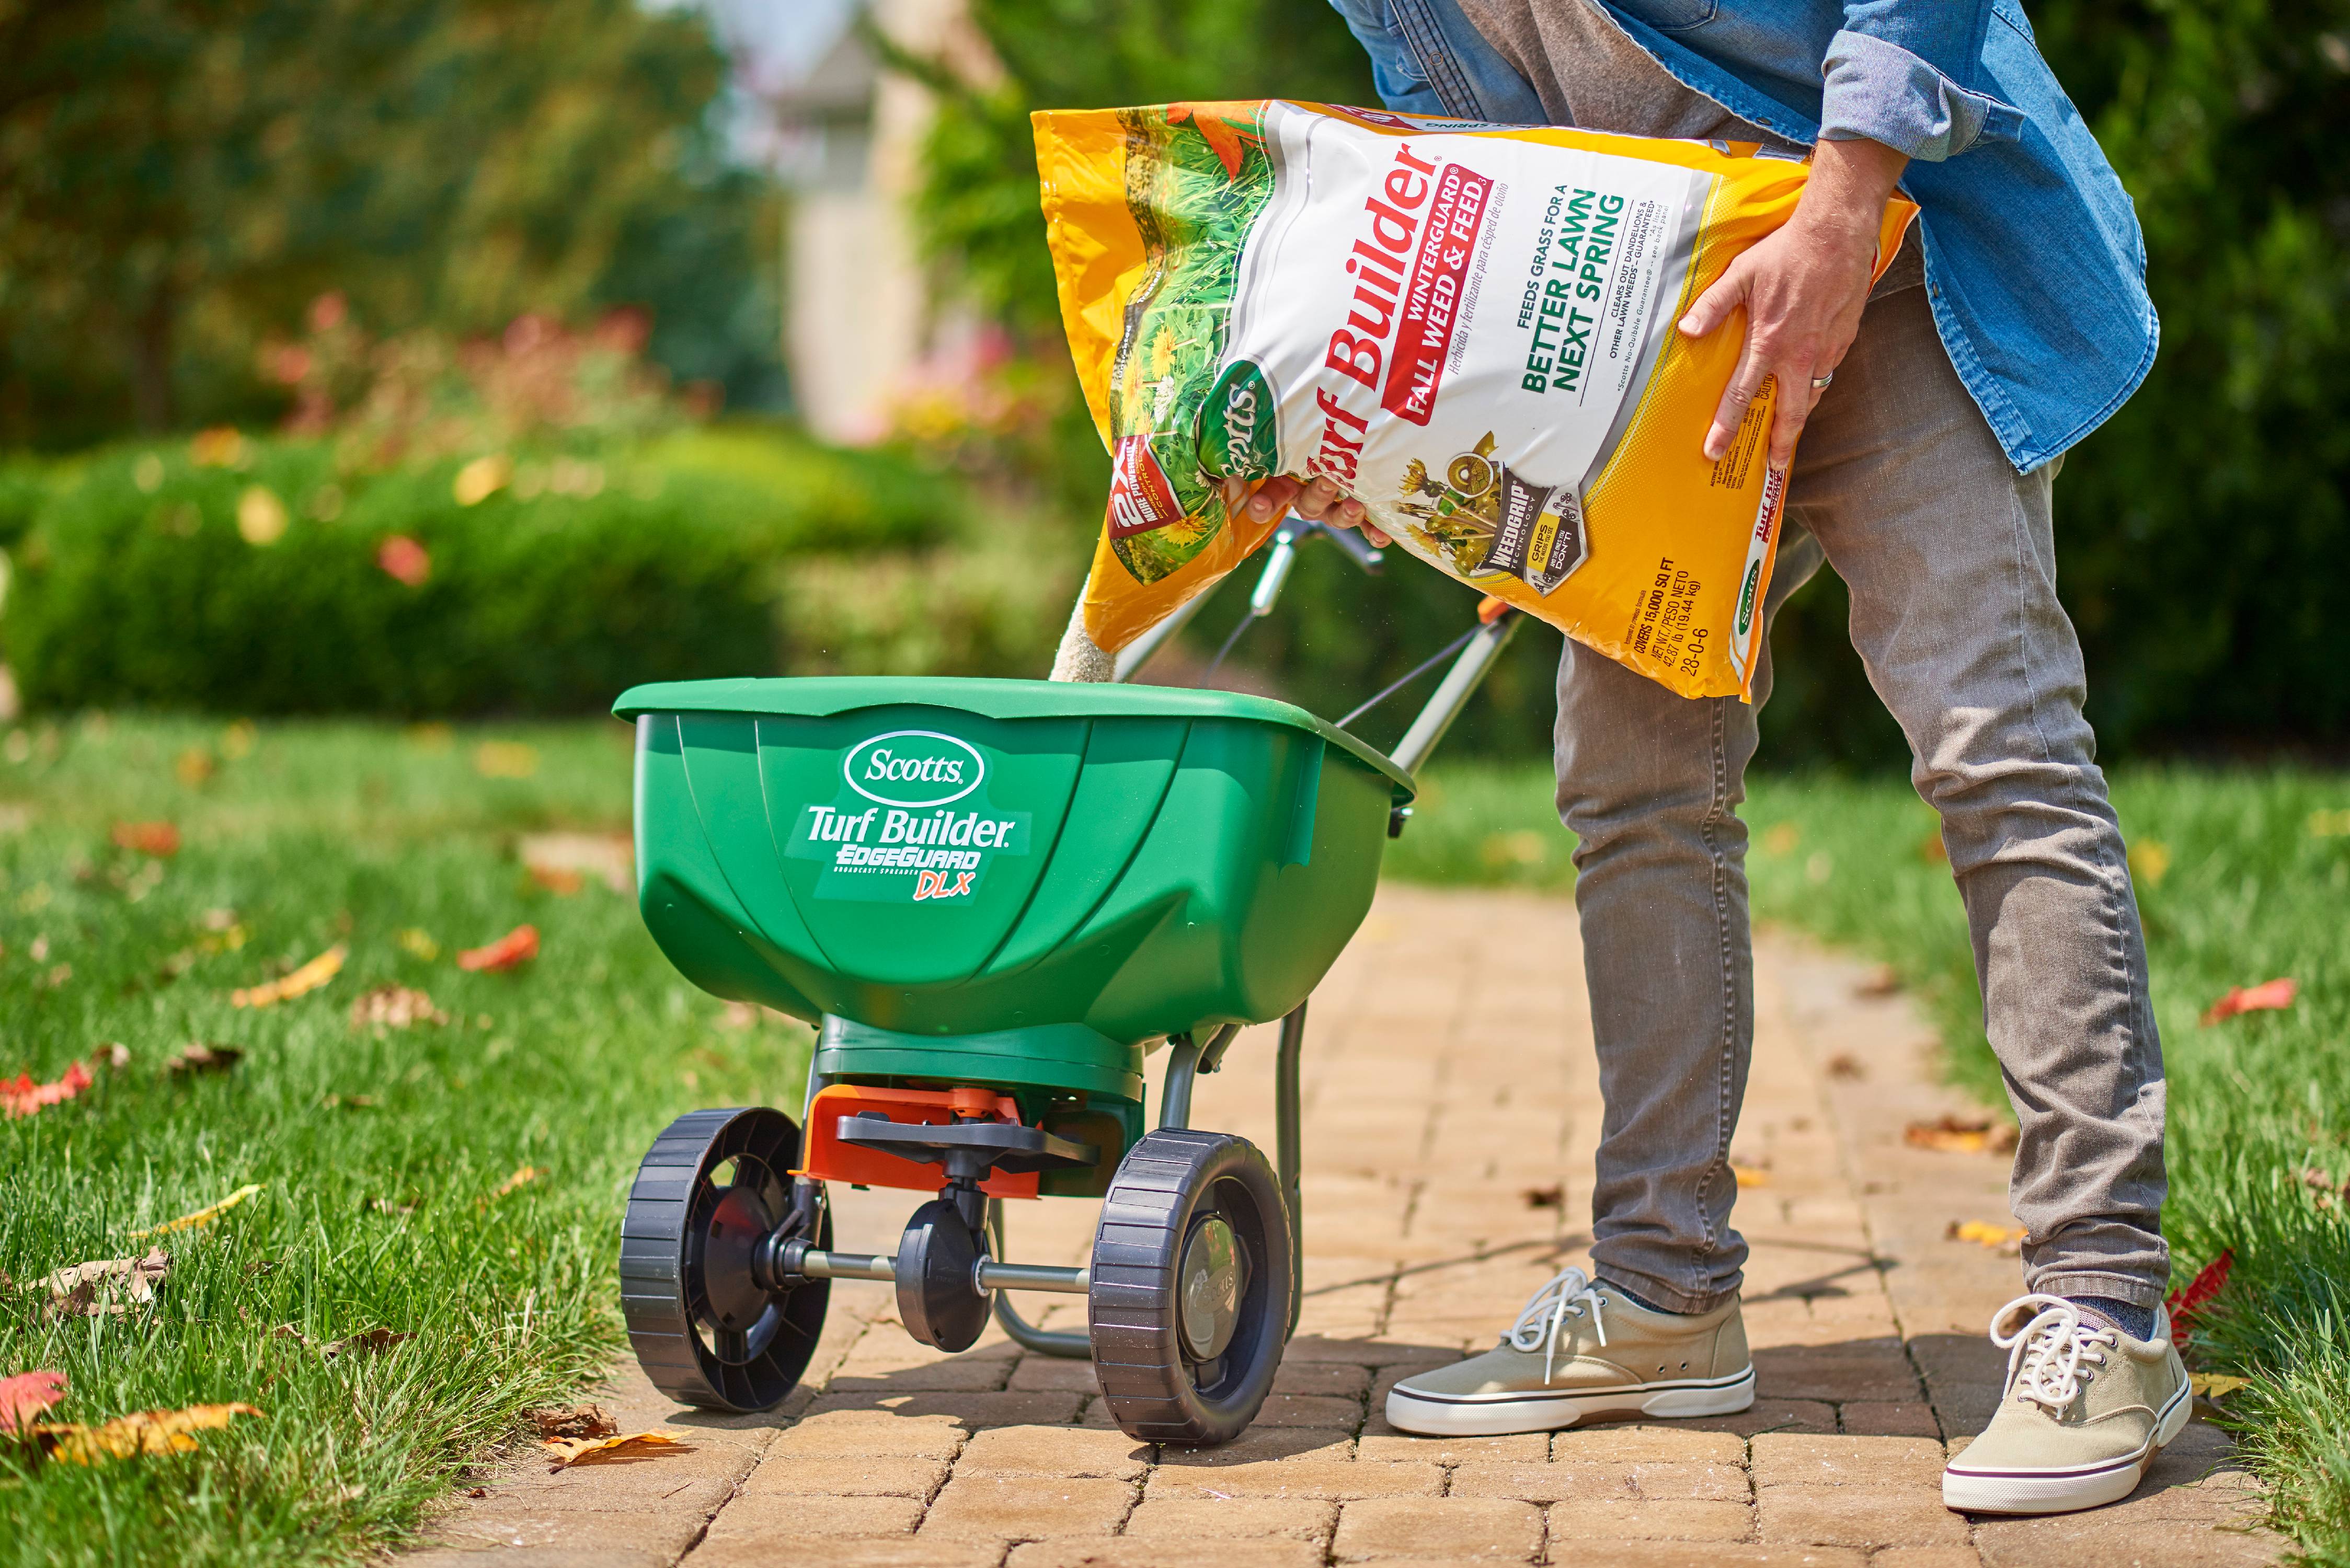 Scotts Turf Builder WinterGuard Fall Weed & Feed3, 14.29 lbs. - image 5 of 10